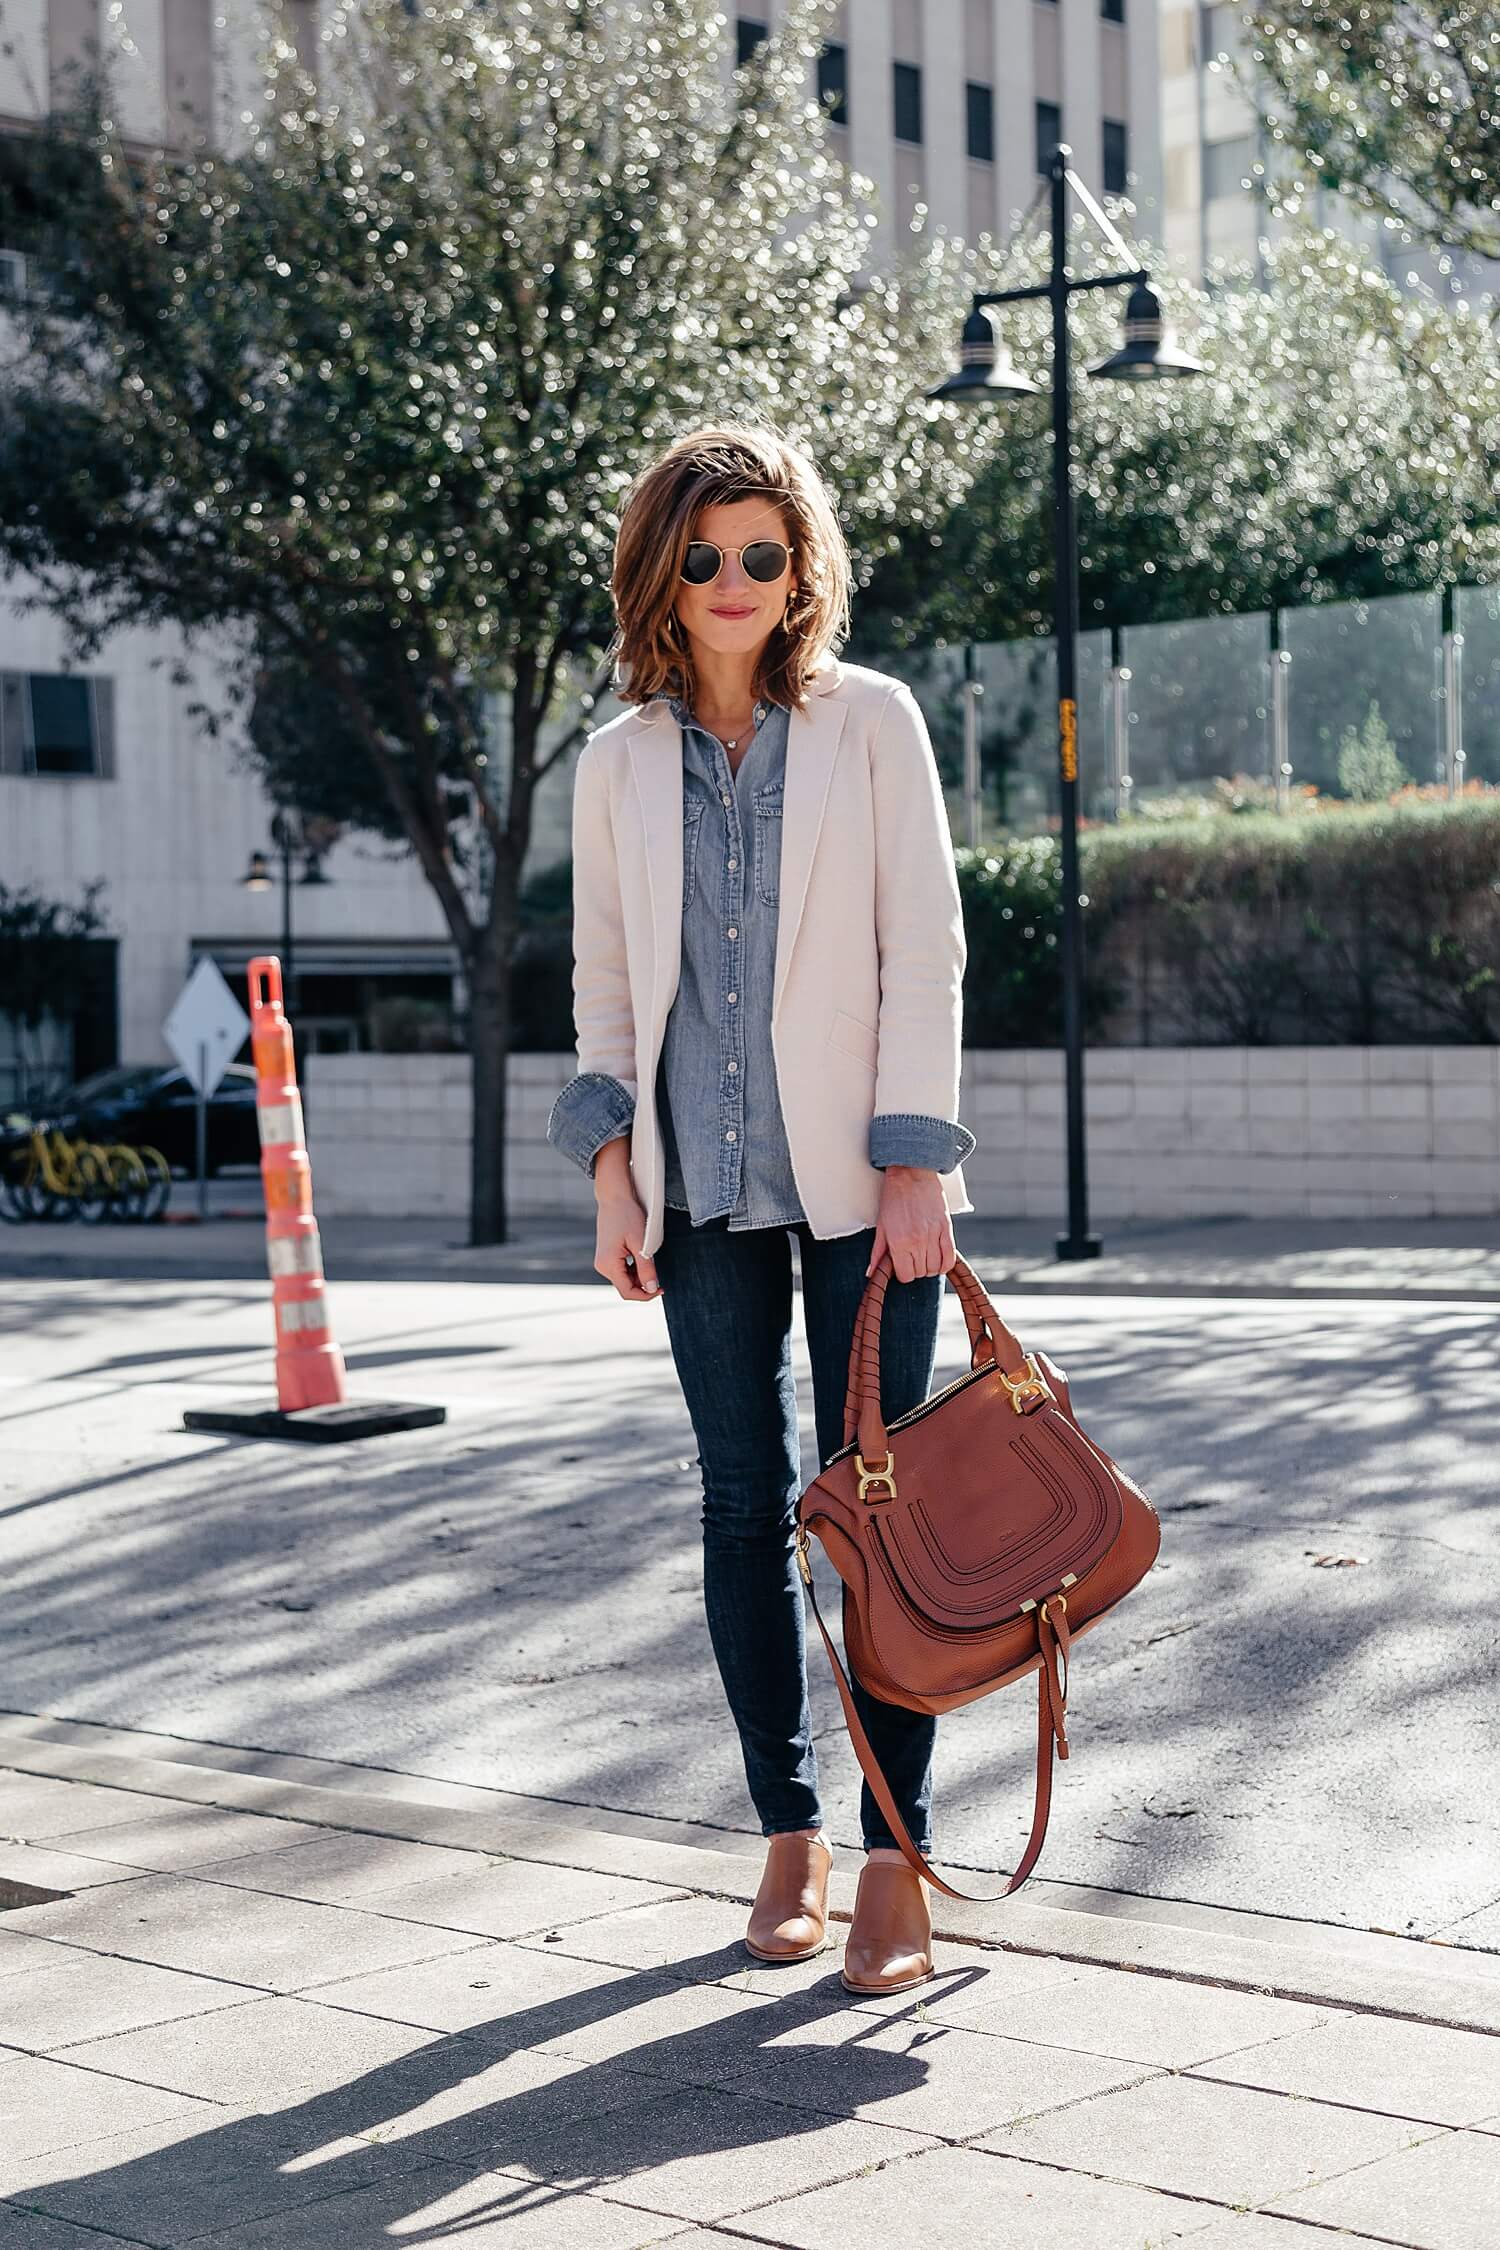 brighton keller wearing dark jeans with chambray shirt and cream blazer, canadian tuxedo casual spring outfit